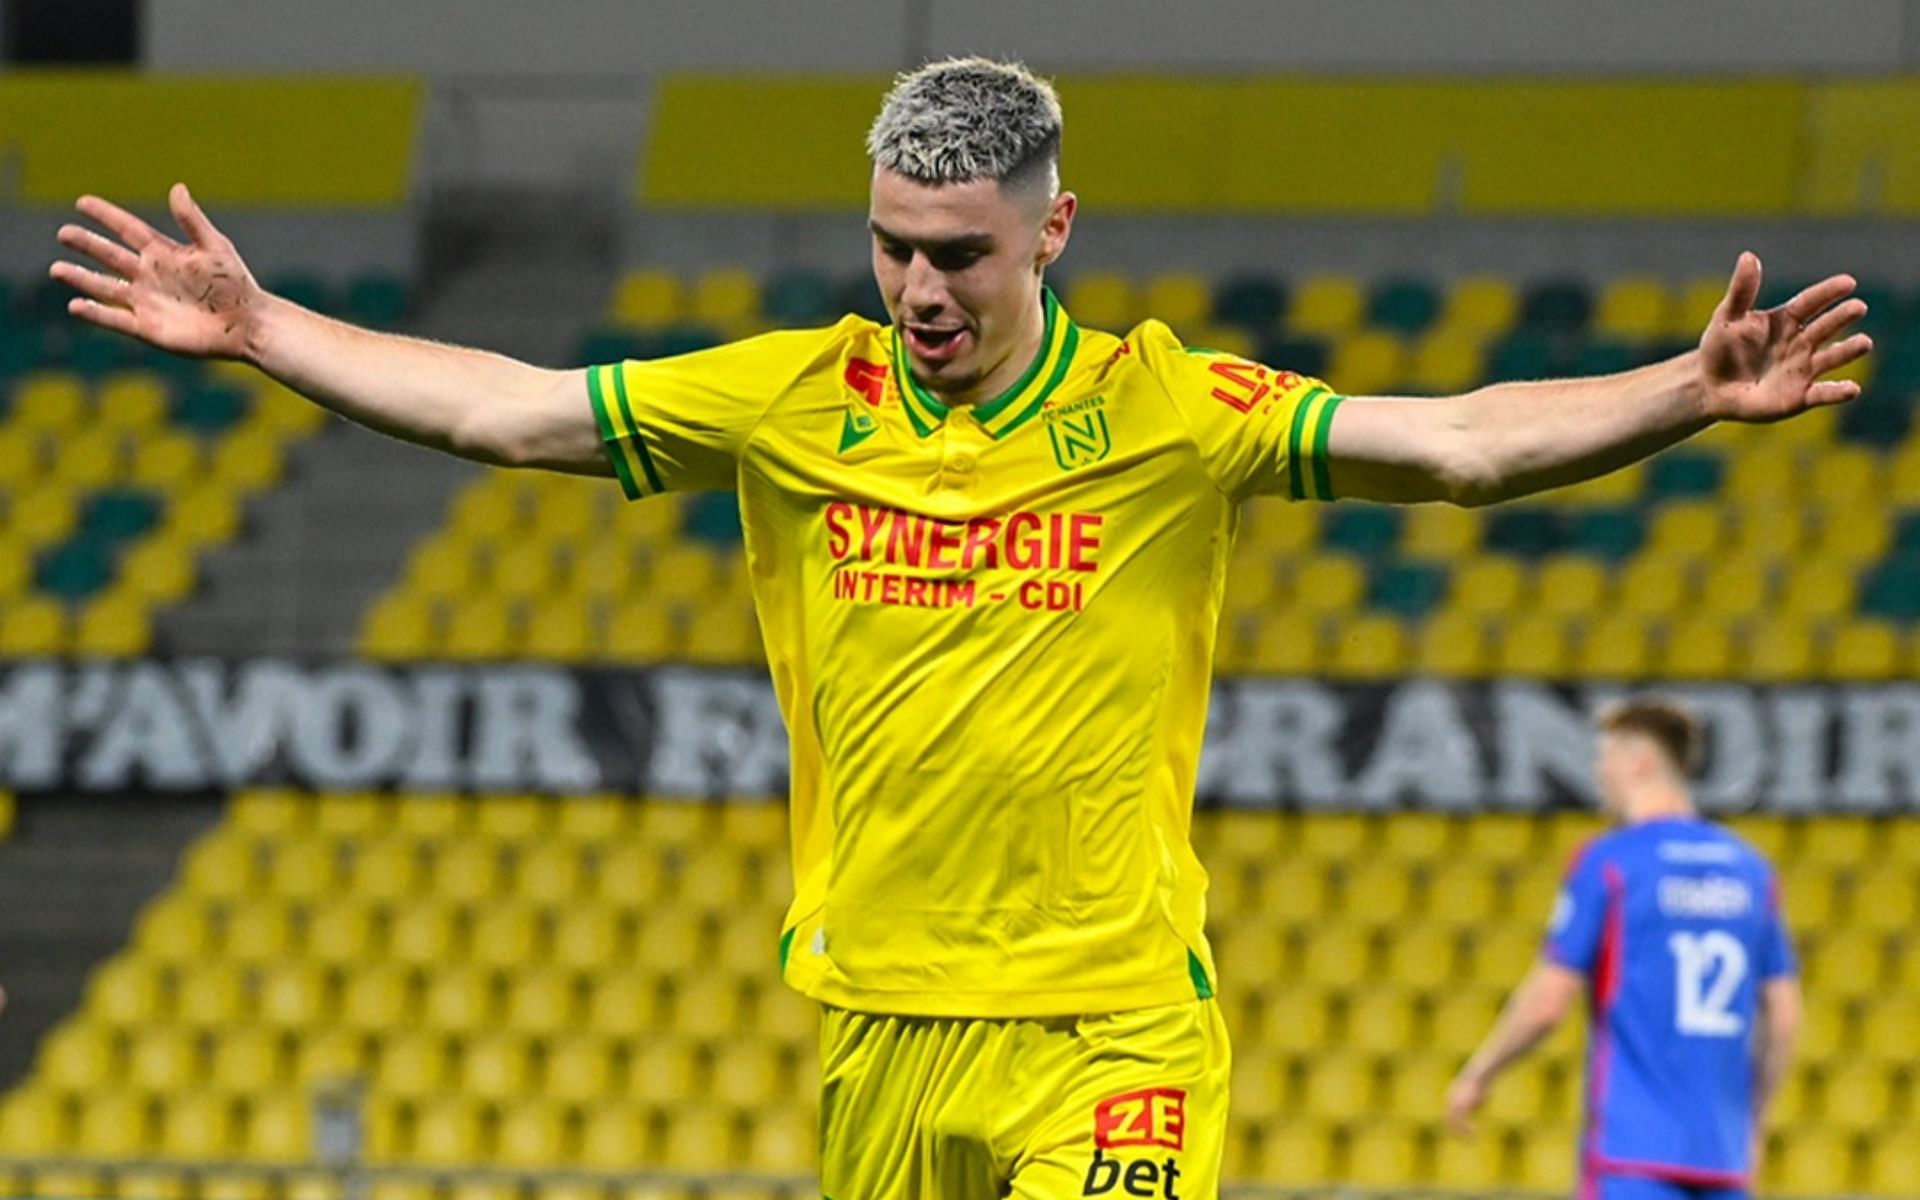 Can Nantes defeat fellow strugglers Le Havre this weekend?